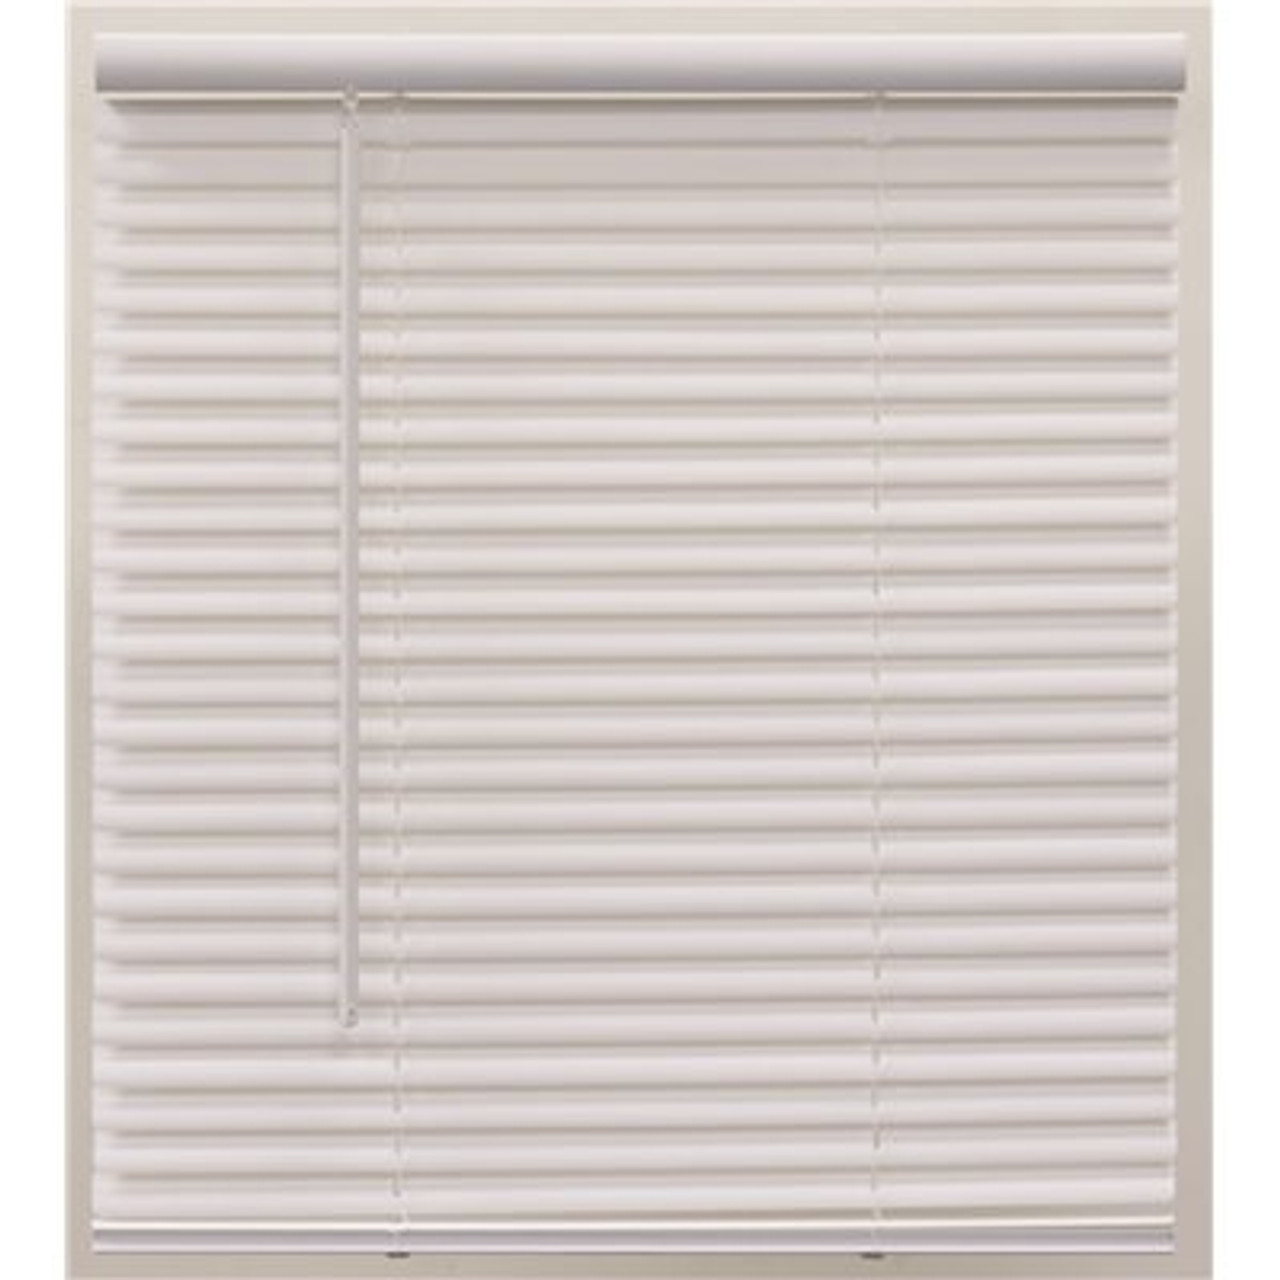 Champion Pre-Cut 68 in. W x 64 in. L Alabaster Cordless Light Filtering Vinyl Mini Blind with 1 in. Slats